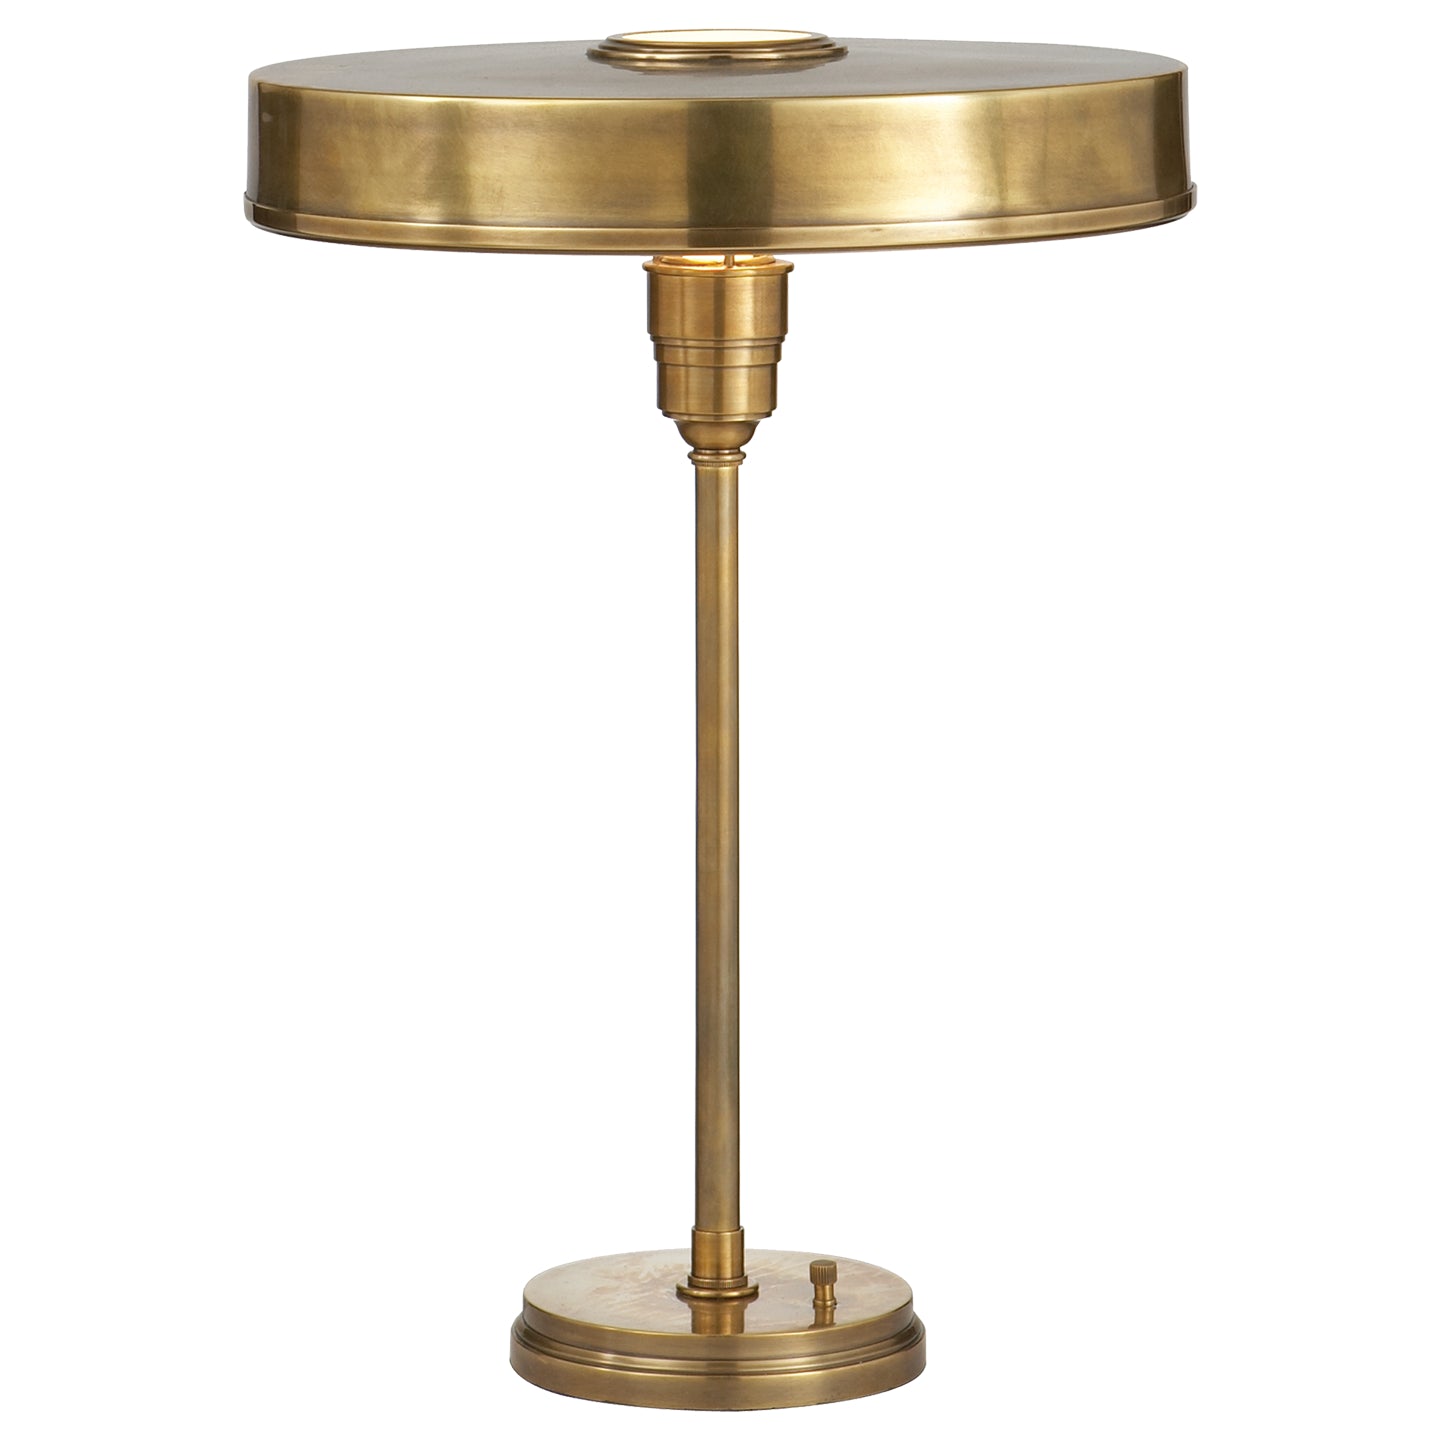 Visual Comfort Signature - TOB 3190HAB - One Light Table Lamp - Carlo - Hand-Rubbed Antique Brass